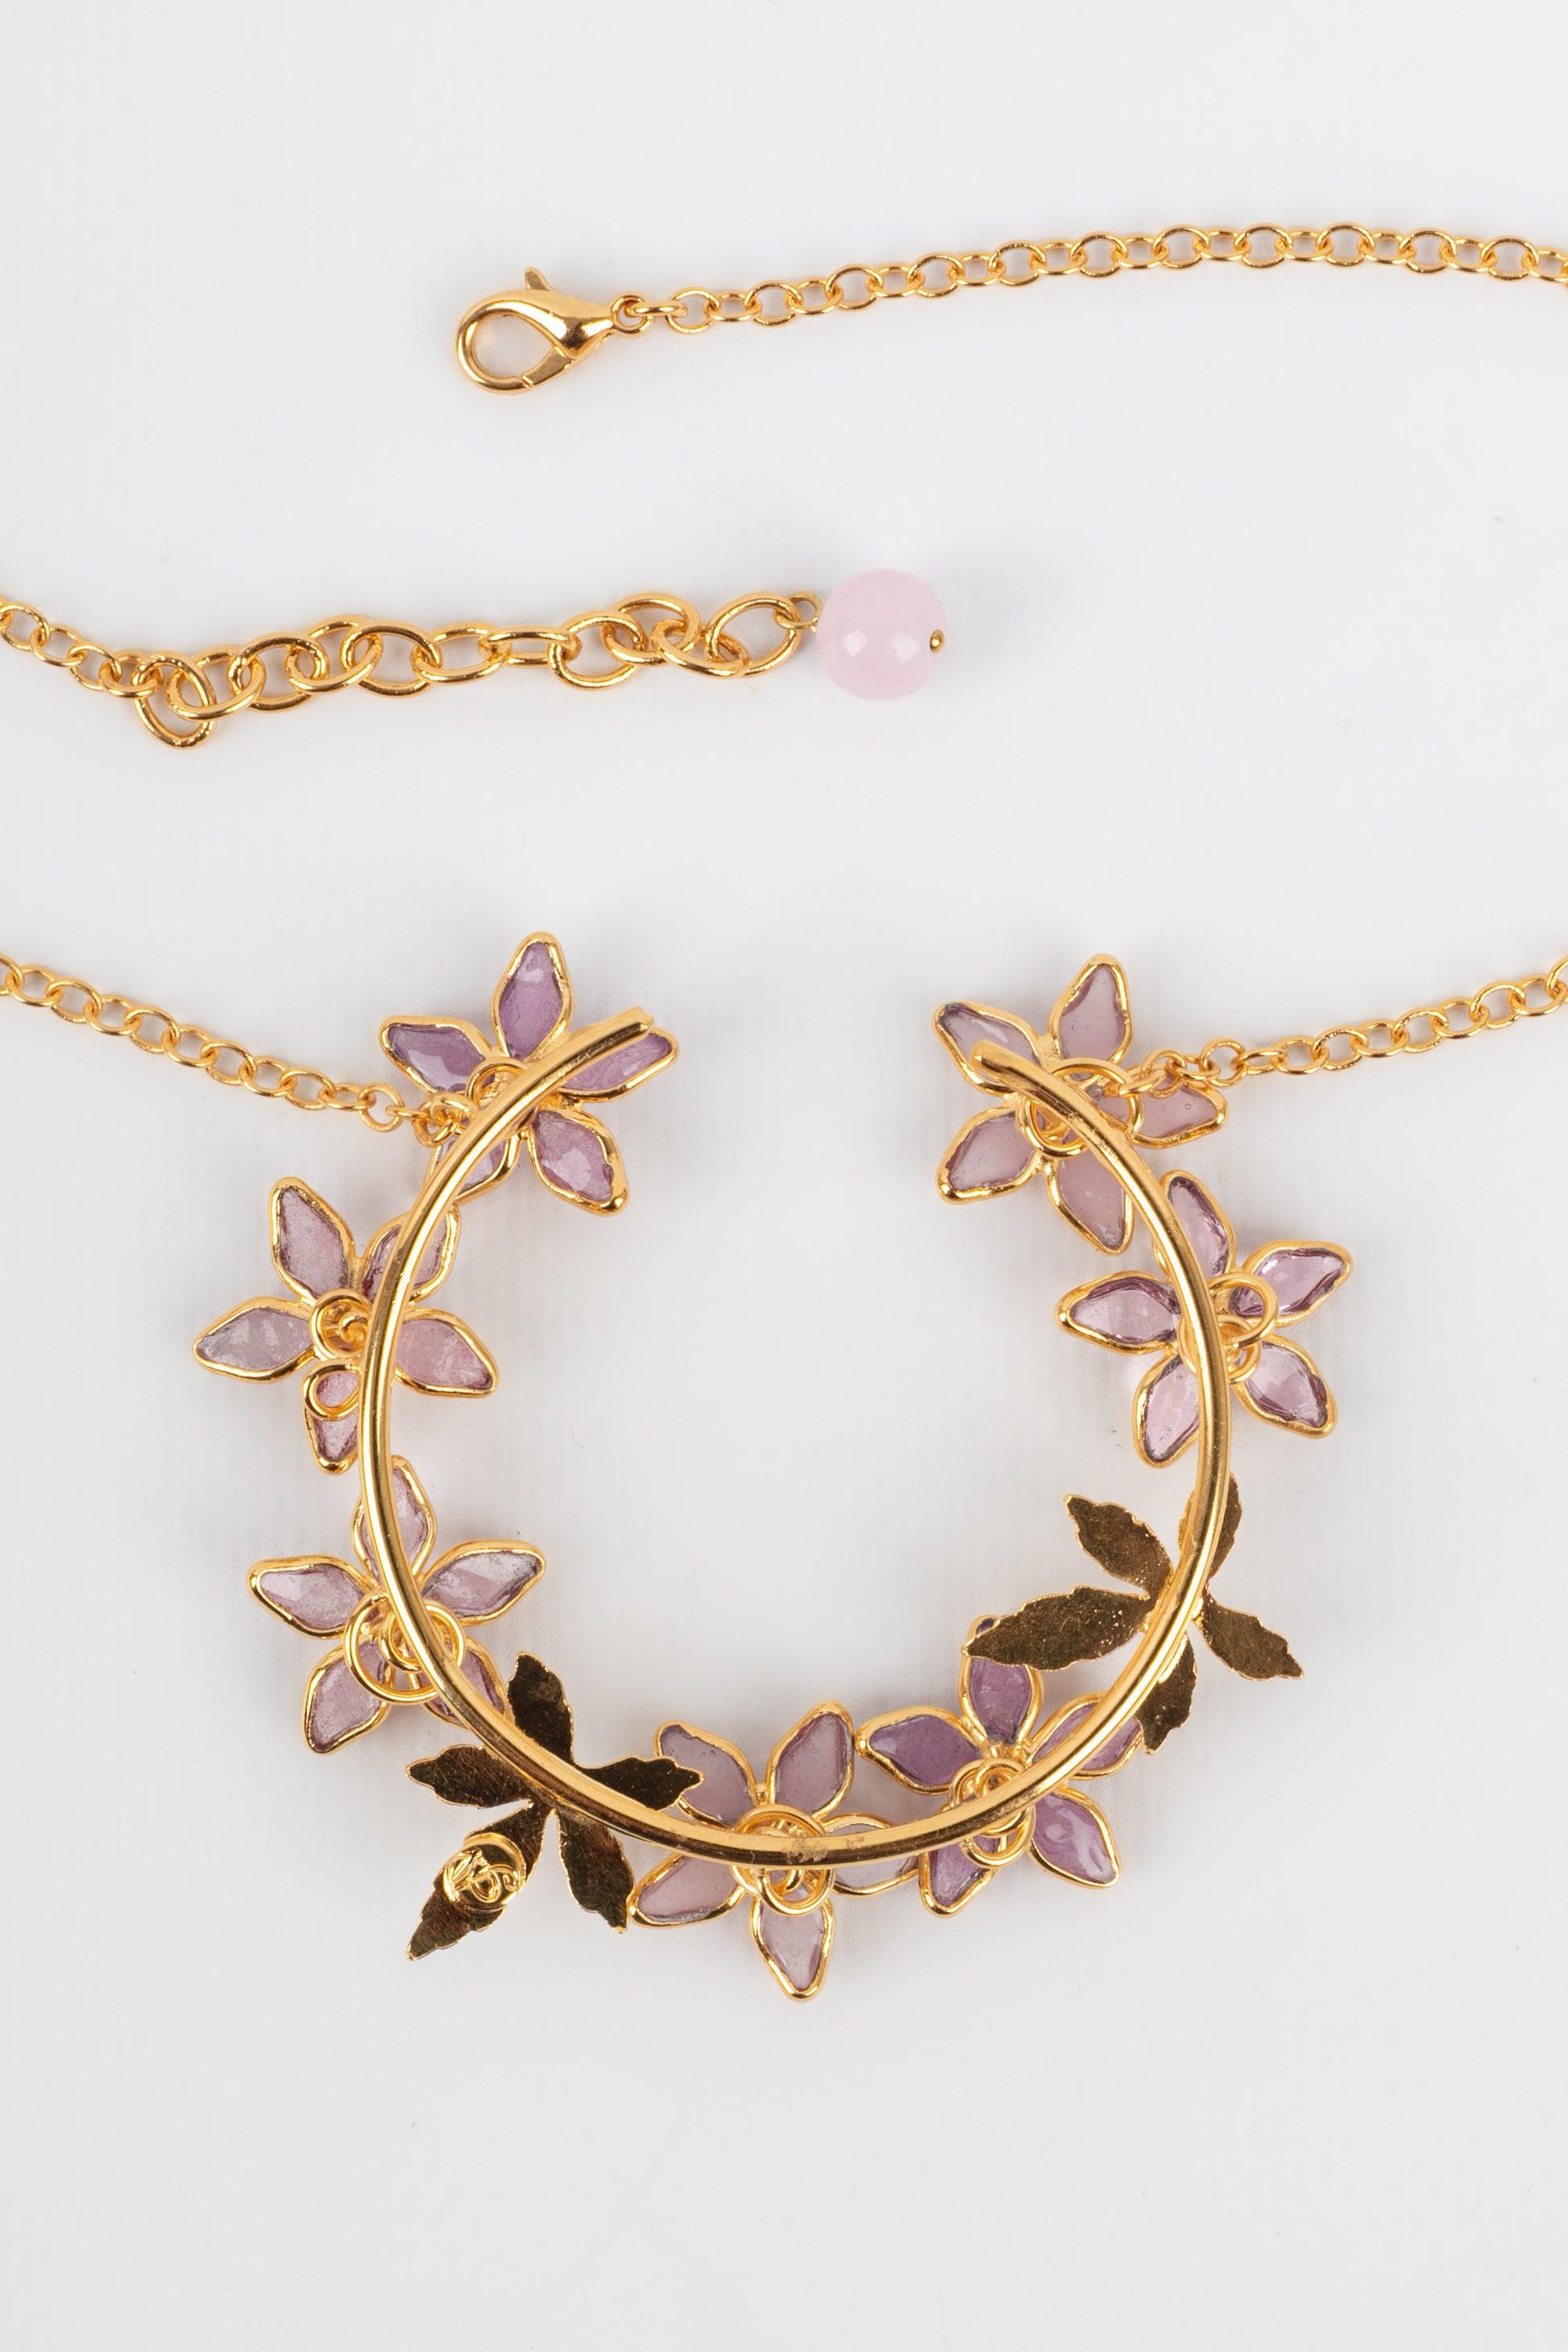 Augustine Golden Metal Necklace with Rhinestones and Glass Paste Pale Pink Tones For Sale 2